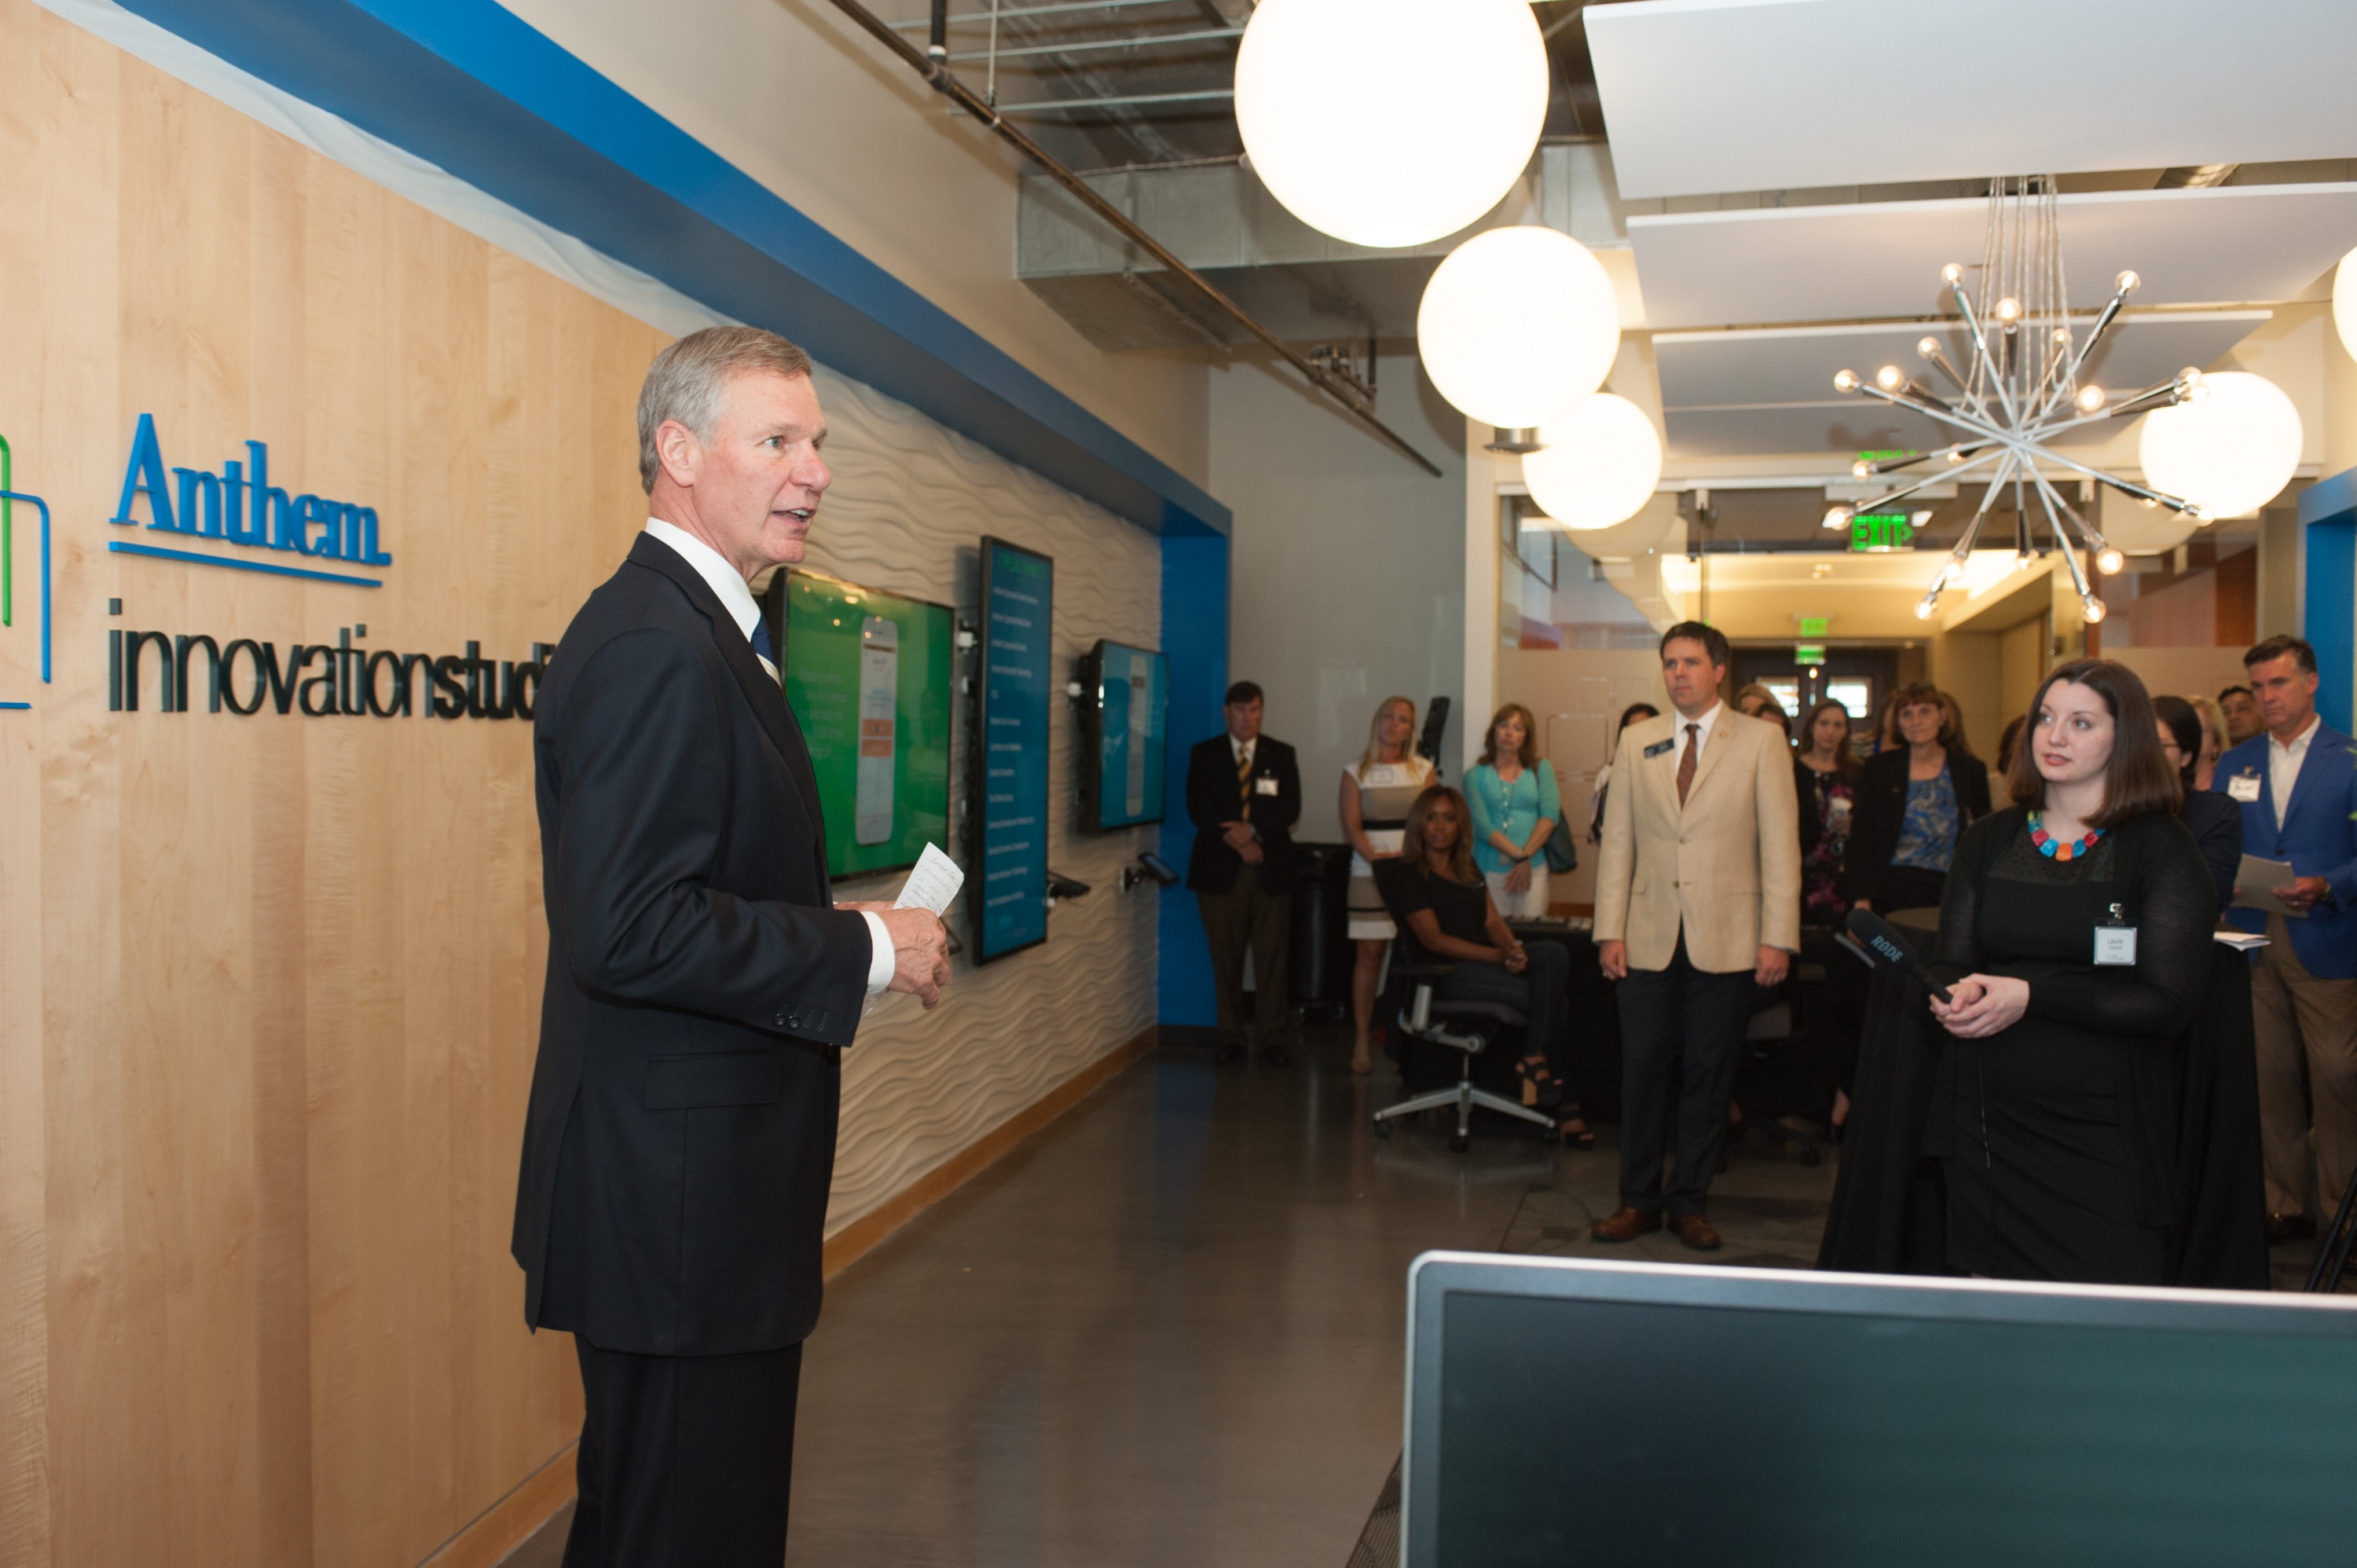 Georgia Tech President G.P. "Bud" Peterson welcomed Anthem to Technology Square. The Fortune 50 company, one of America’s largest insurance providers, opened an Innovation Studio in the Centergy Building.